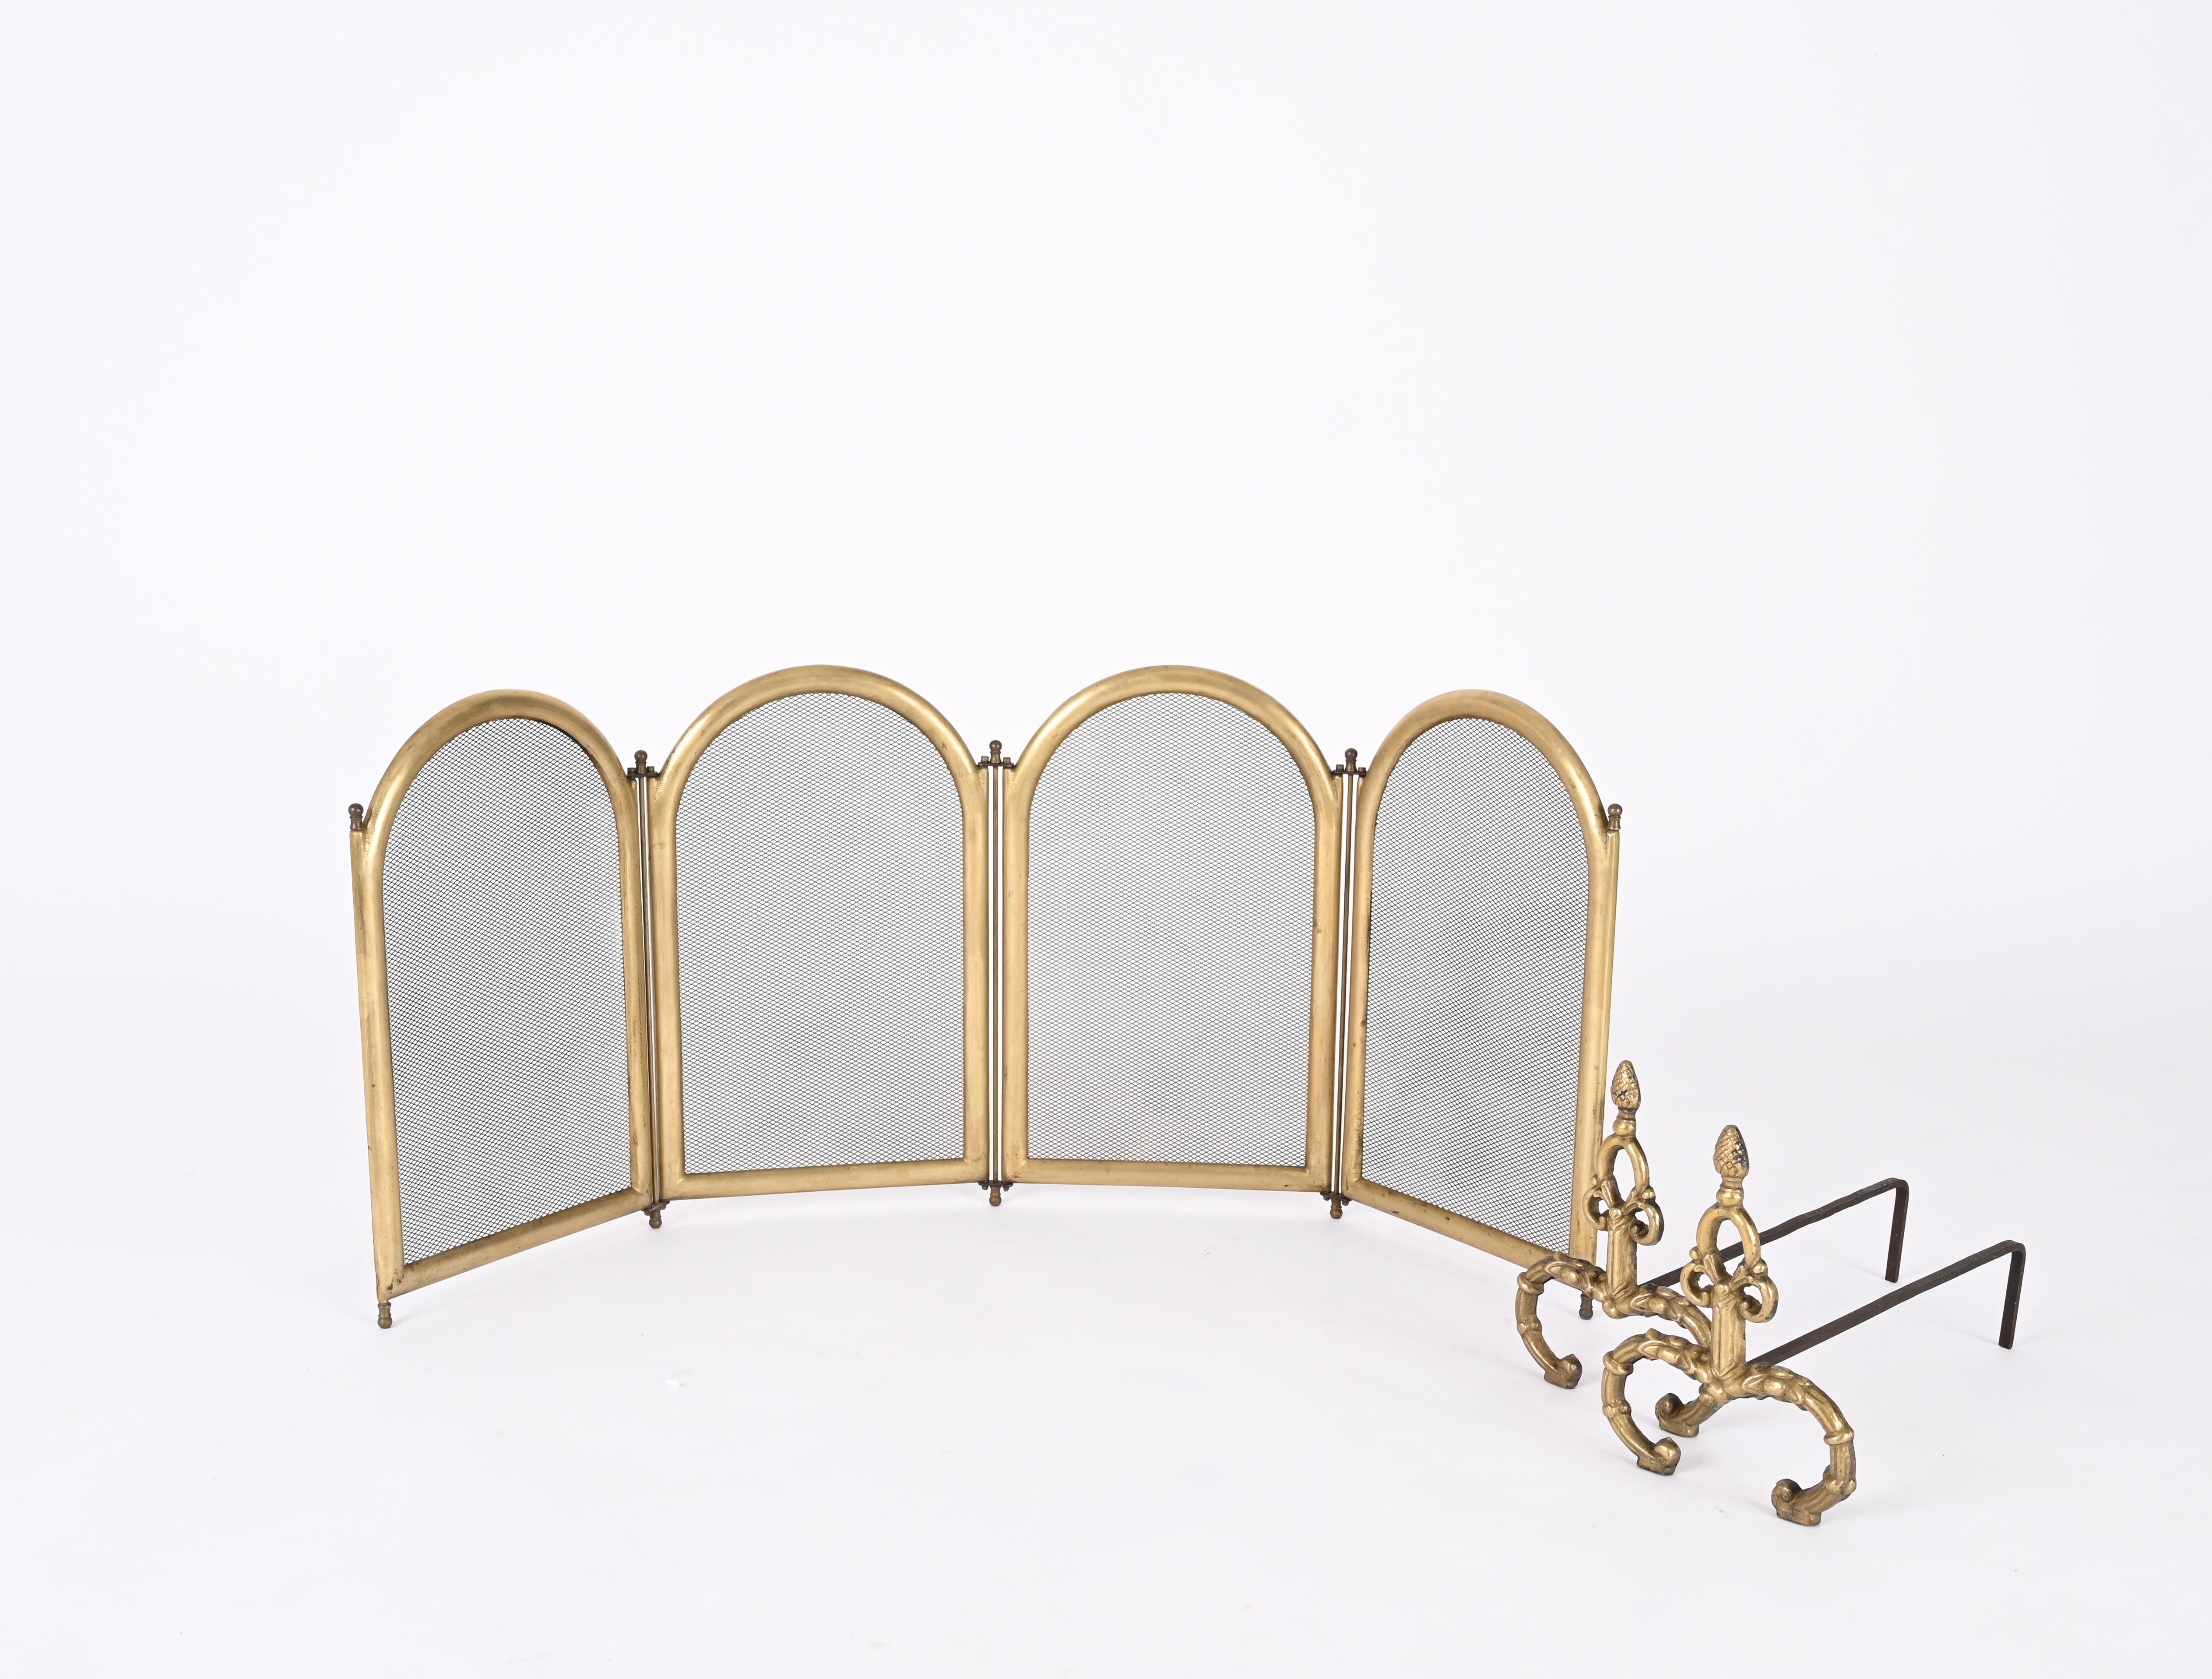 Hand-Crafted Italian Solid Brass Folding Fireplace Screen or Fire Guard, Italy 1960s For Sale